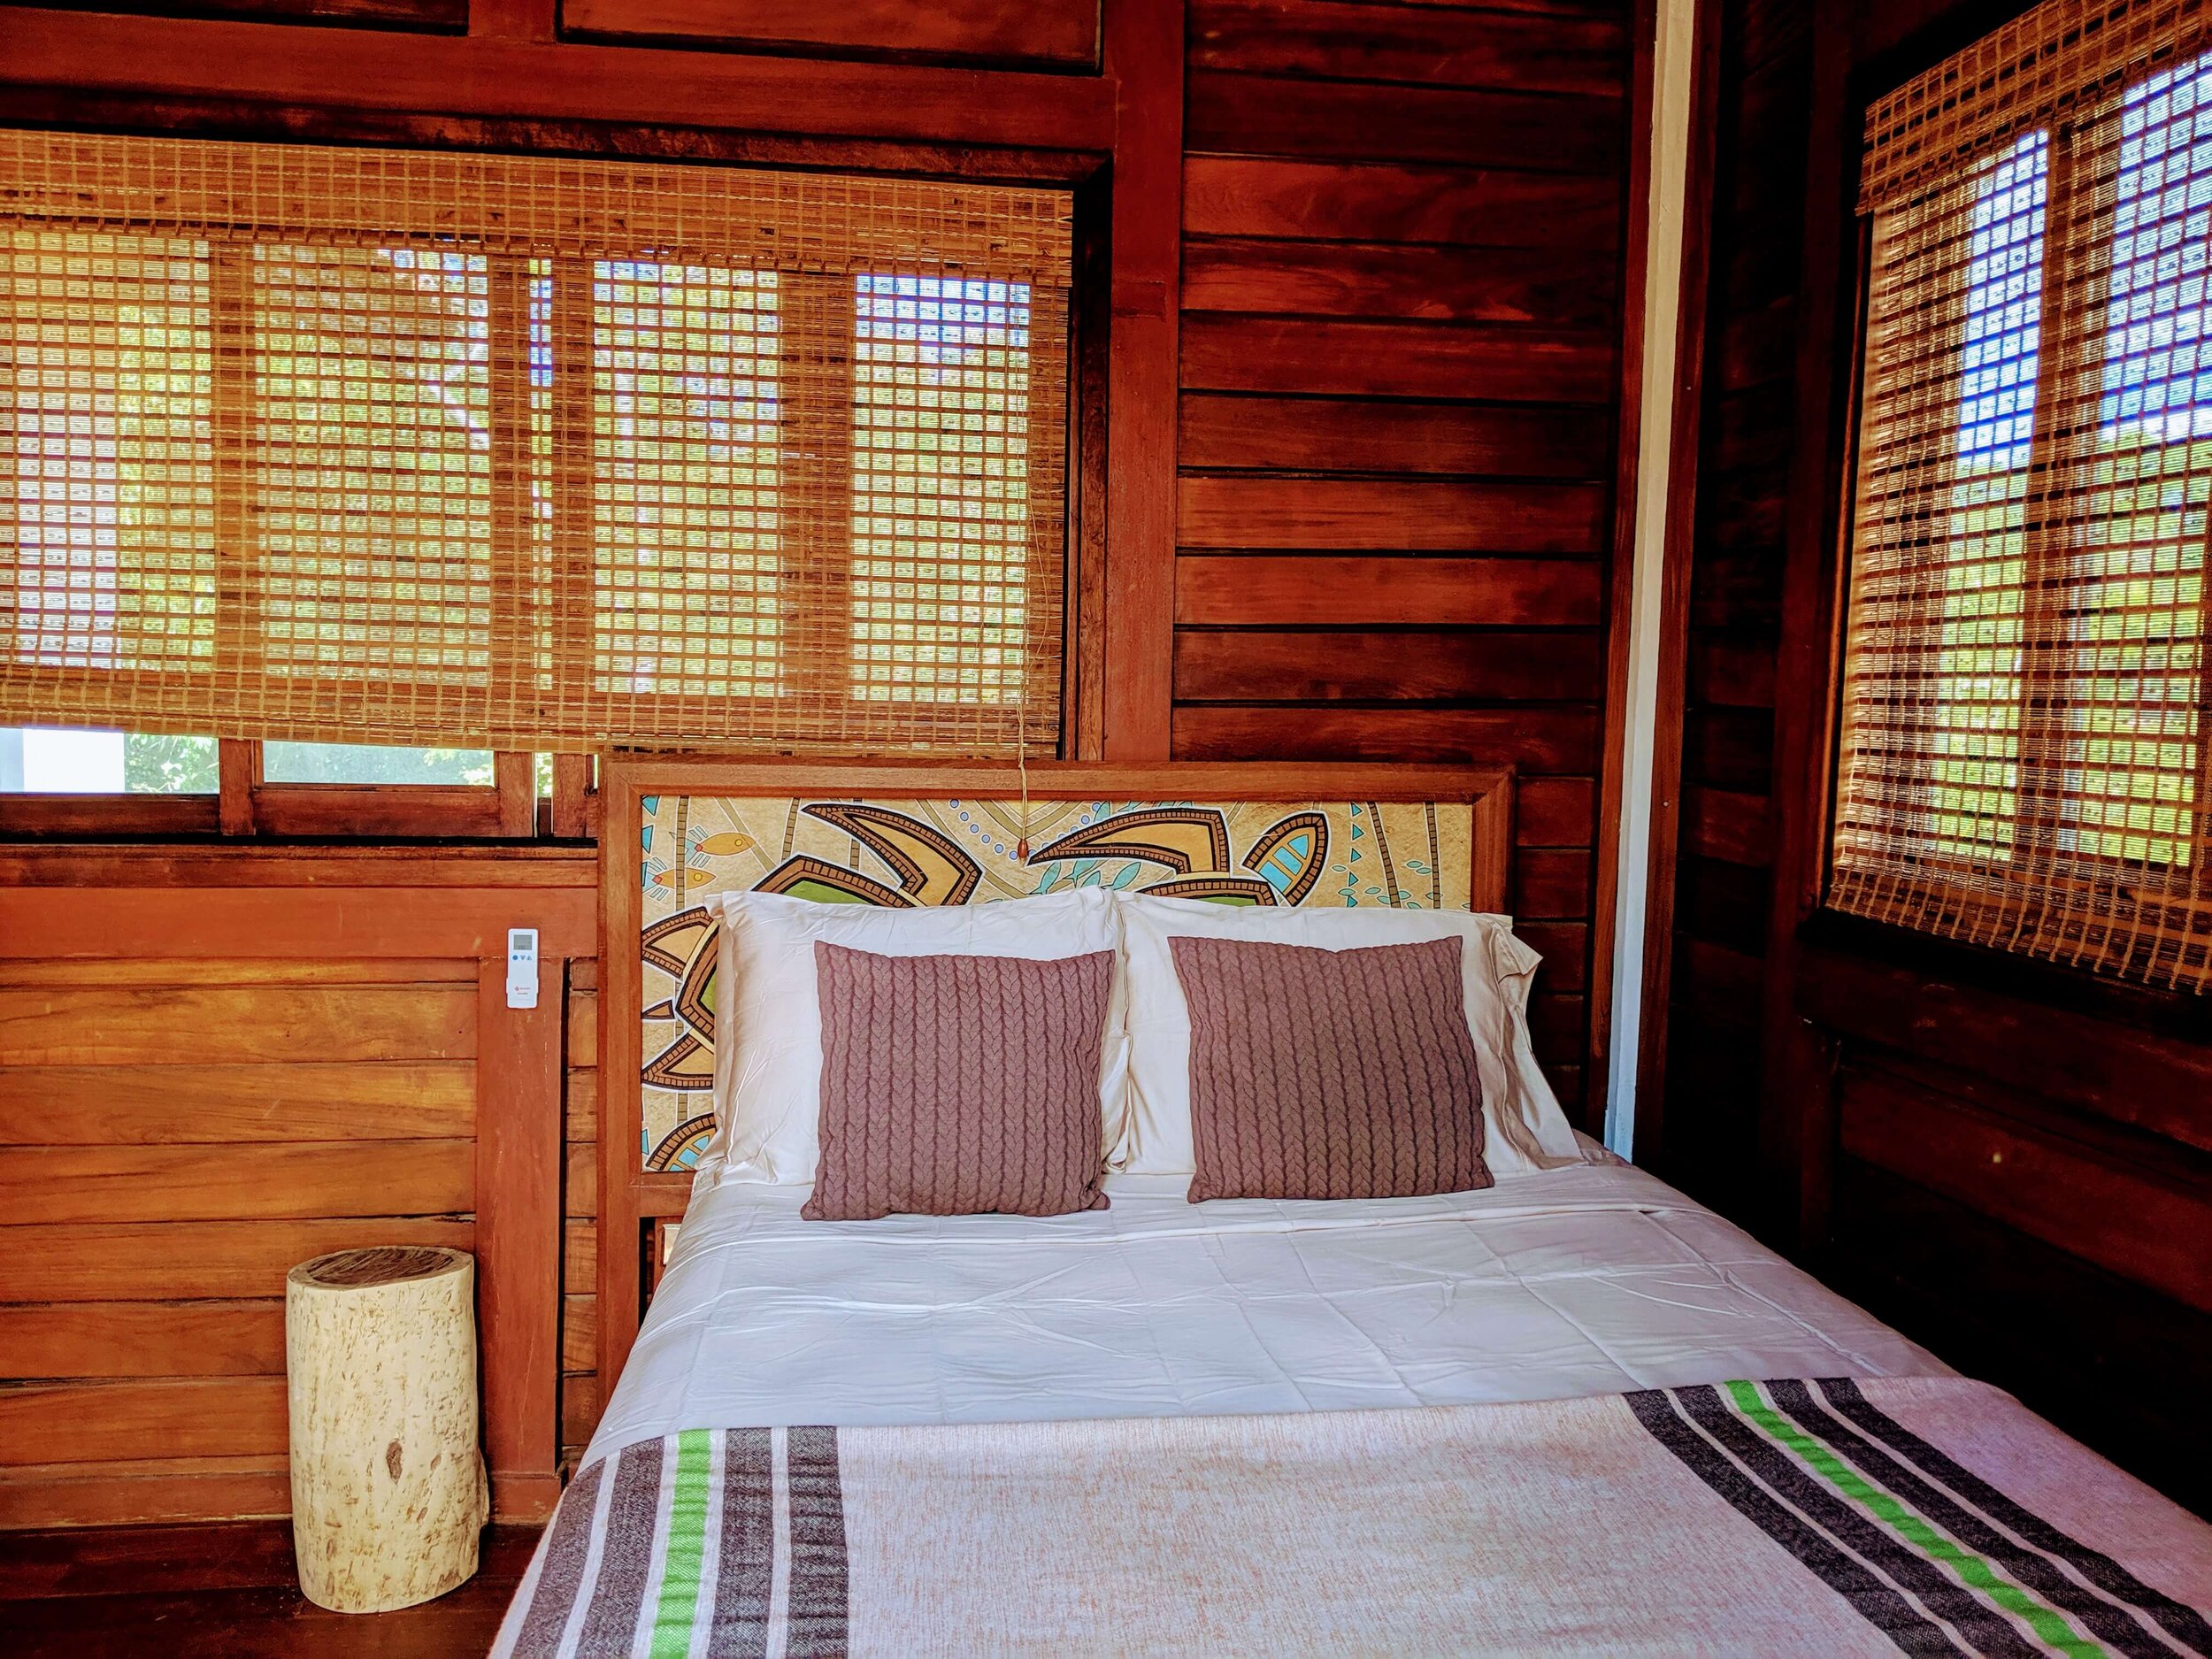 Secondary bedroom double bed 2nd floor Redonda bay holiday homes for rent Tola, Nicaragua.jpg